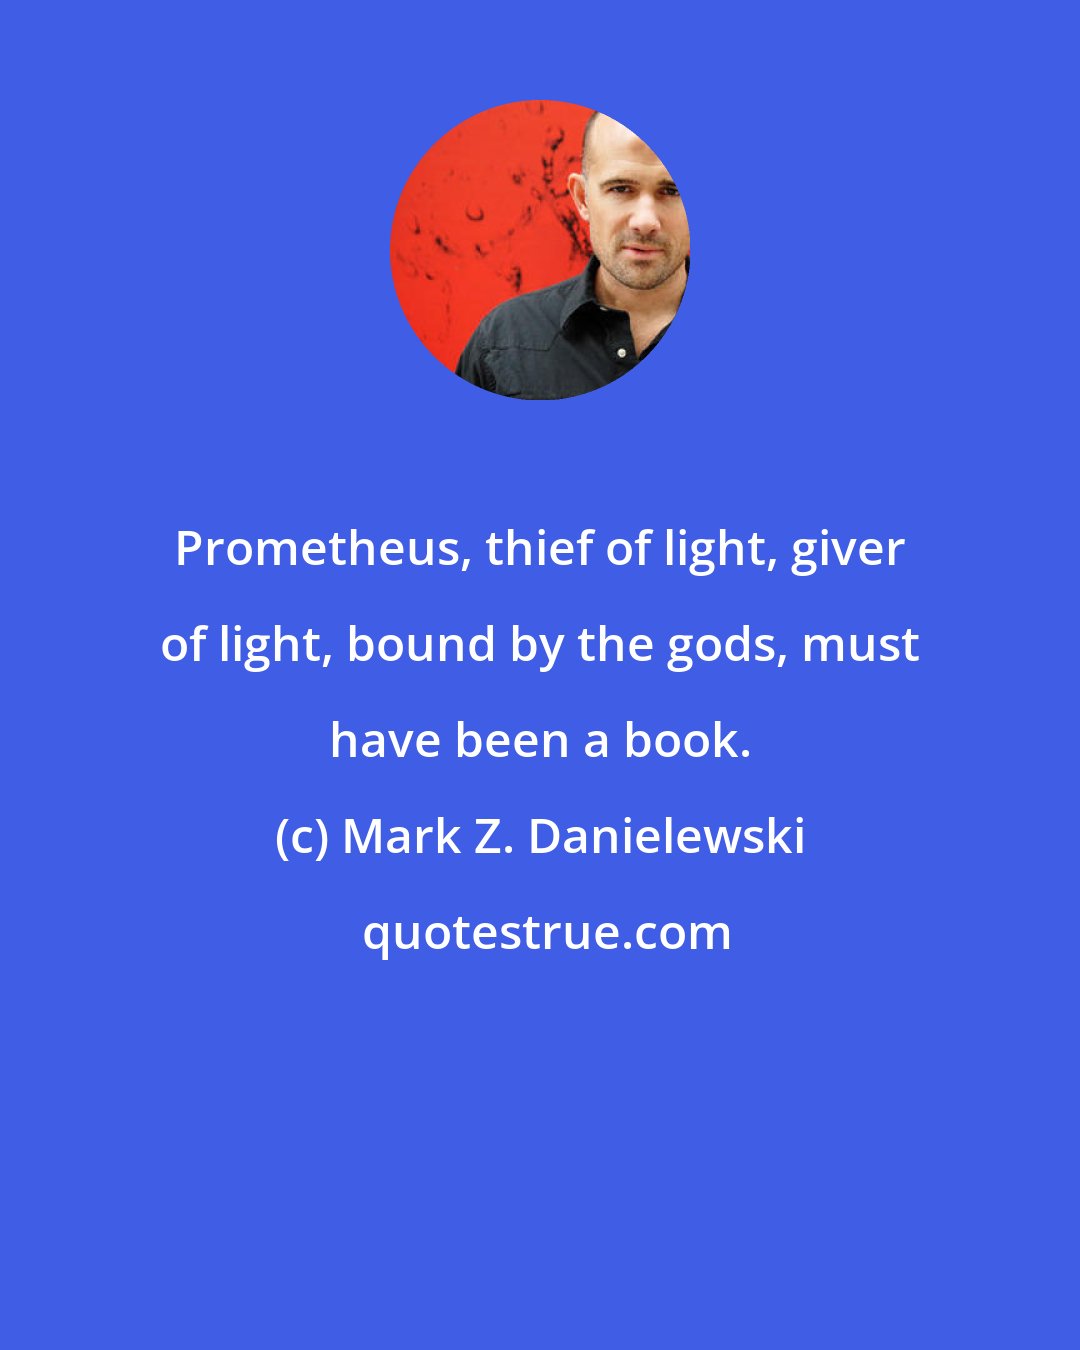 Mark Z. Danielewski: Prometheus, thief of light, giver of light, bound by the gods, must have been a book.